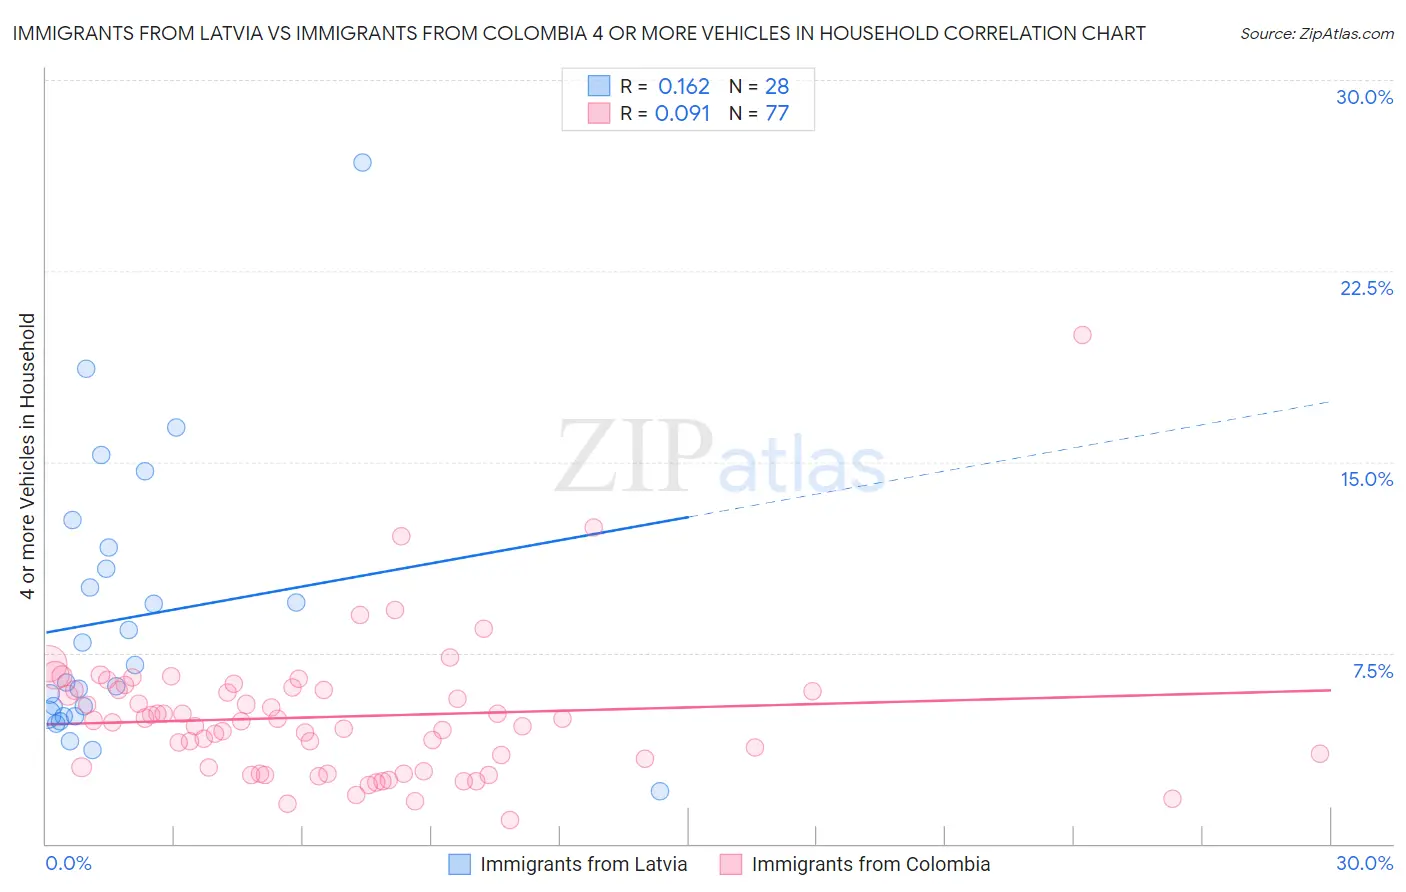 Immigrants from Latvia vs Immigrants from Colombia 4 or more Vehicles in Household